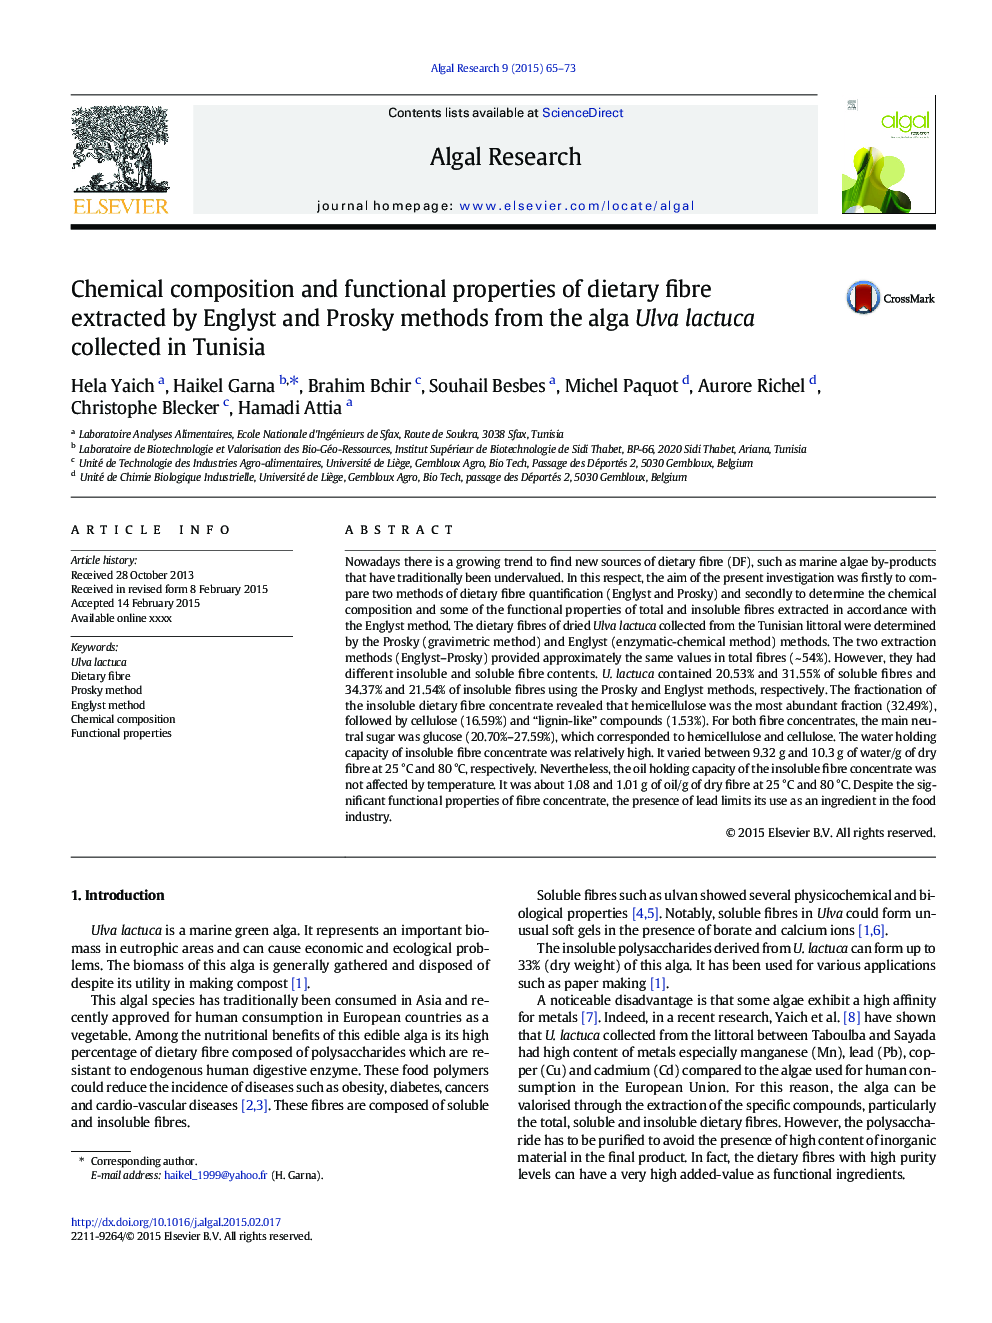 Chemical composition and functional properties of dietary fibre extracted by Englyst and Prosky methods from the alga Ulva lactuca collected in Tunisia